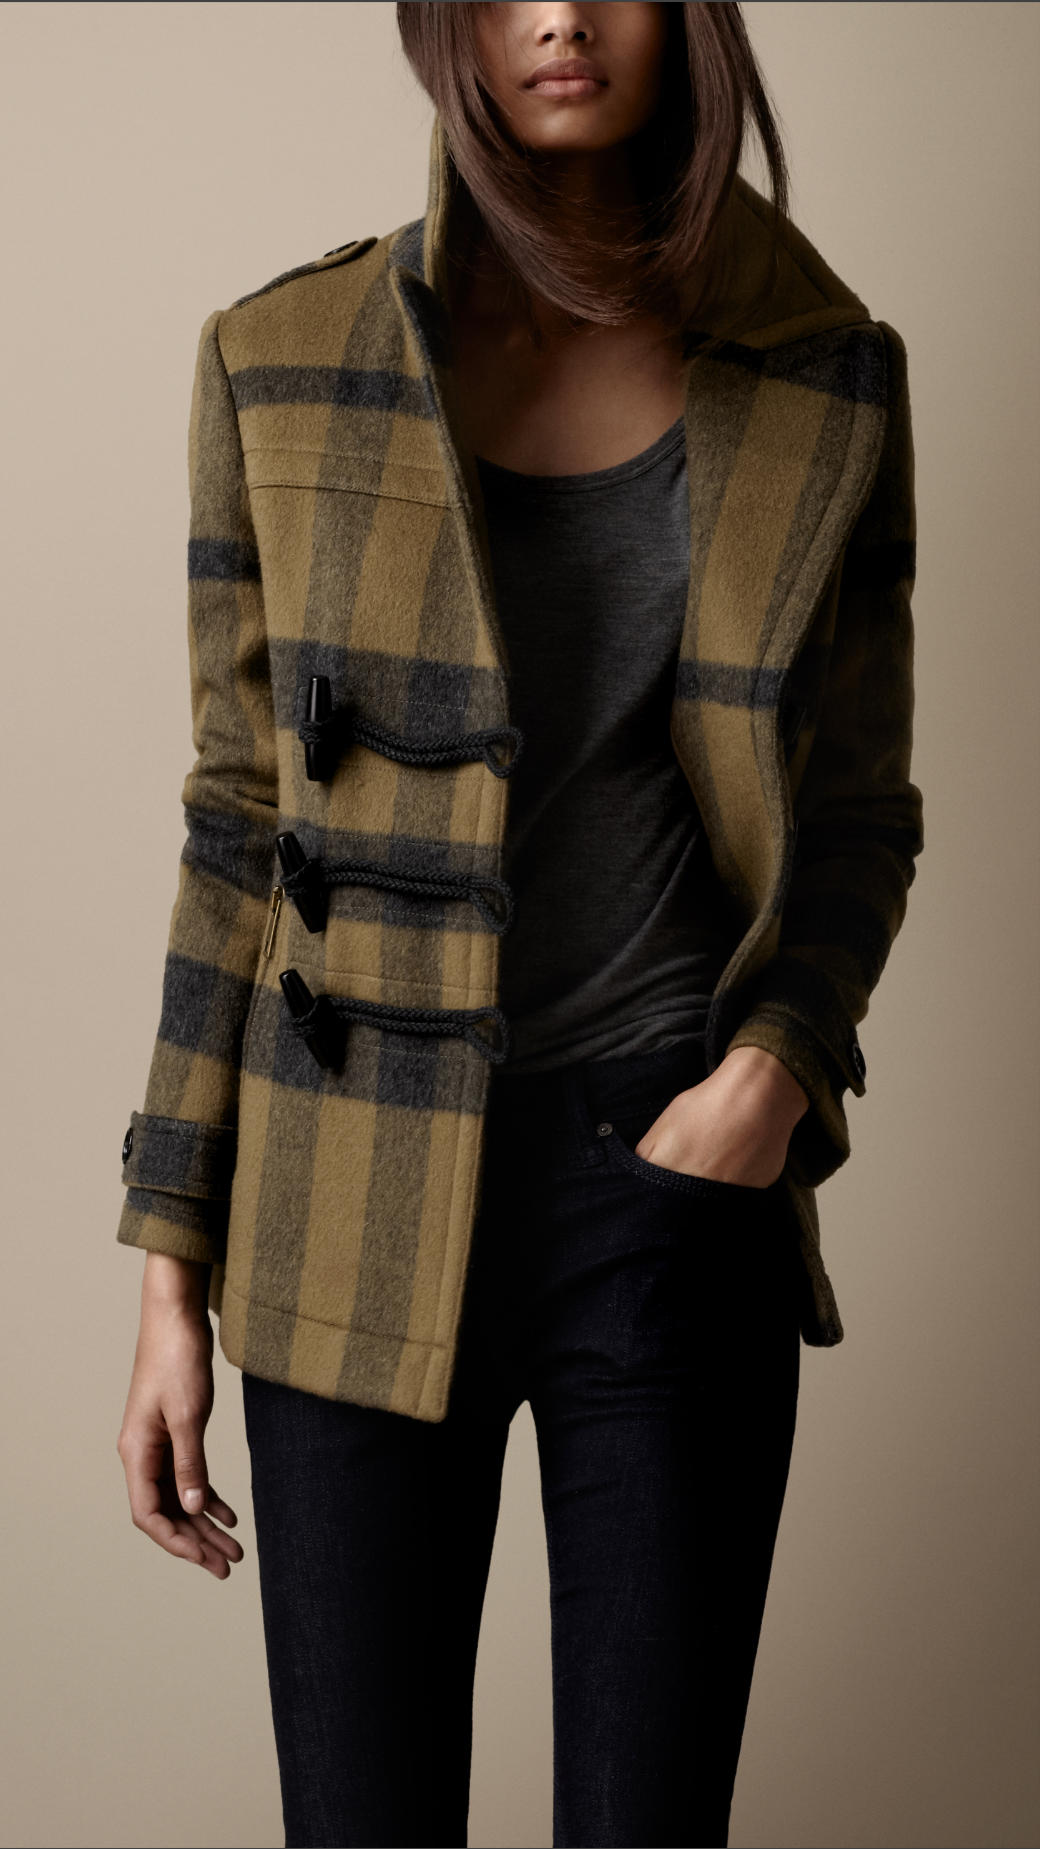 Lyst - Burberry Brit Check Wool Pea Coat in Green